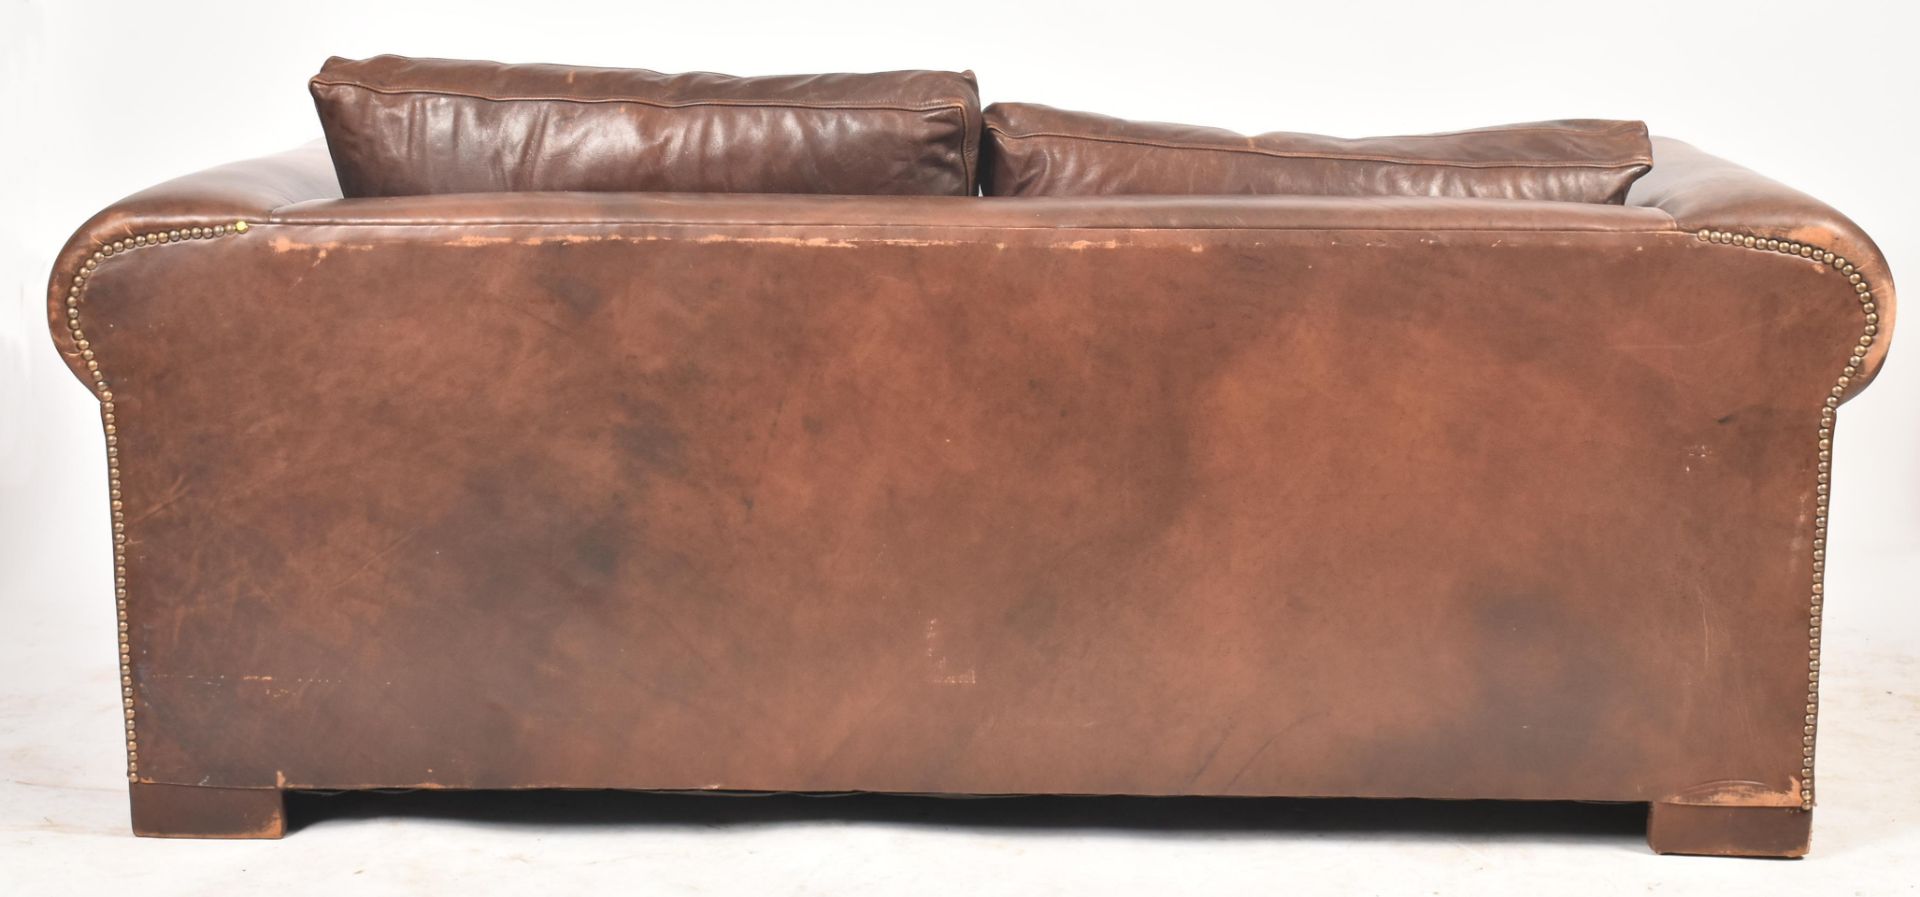 MODERN HIGH-END BRITISH DESIGN TWO SEATER LEATHER SOFA - Image 7 of 7